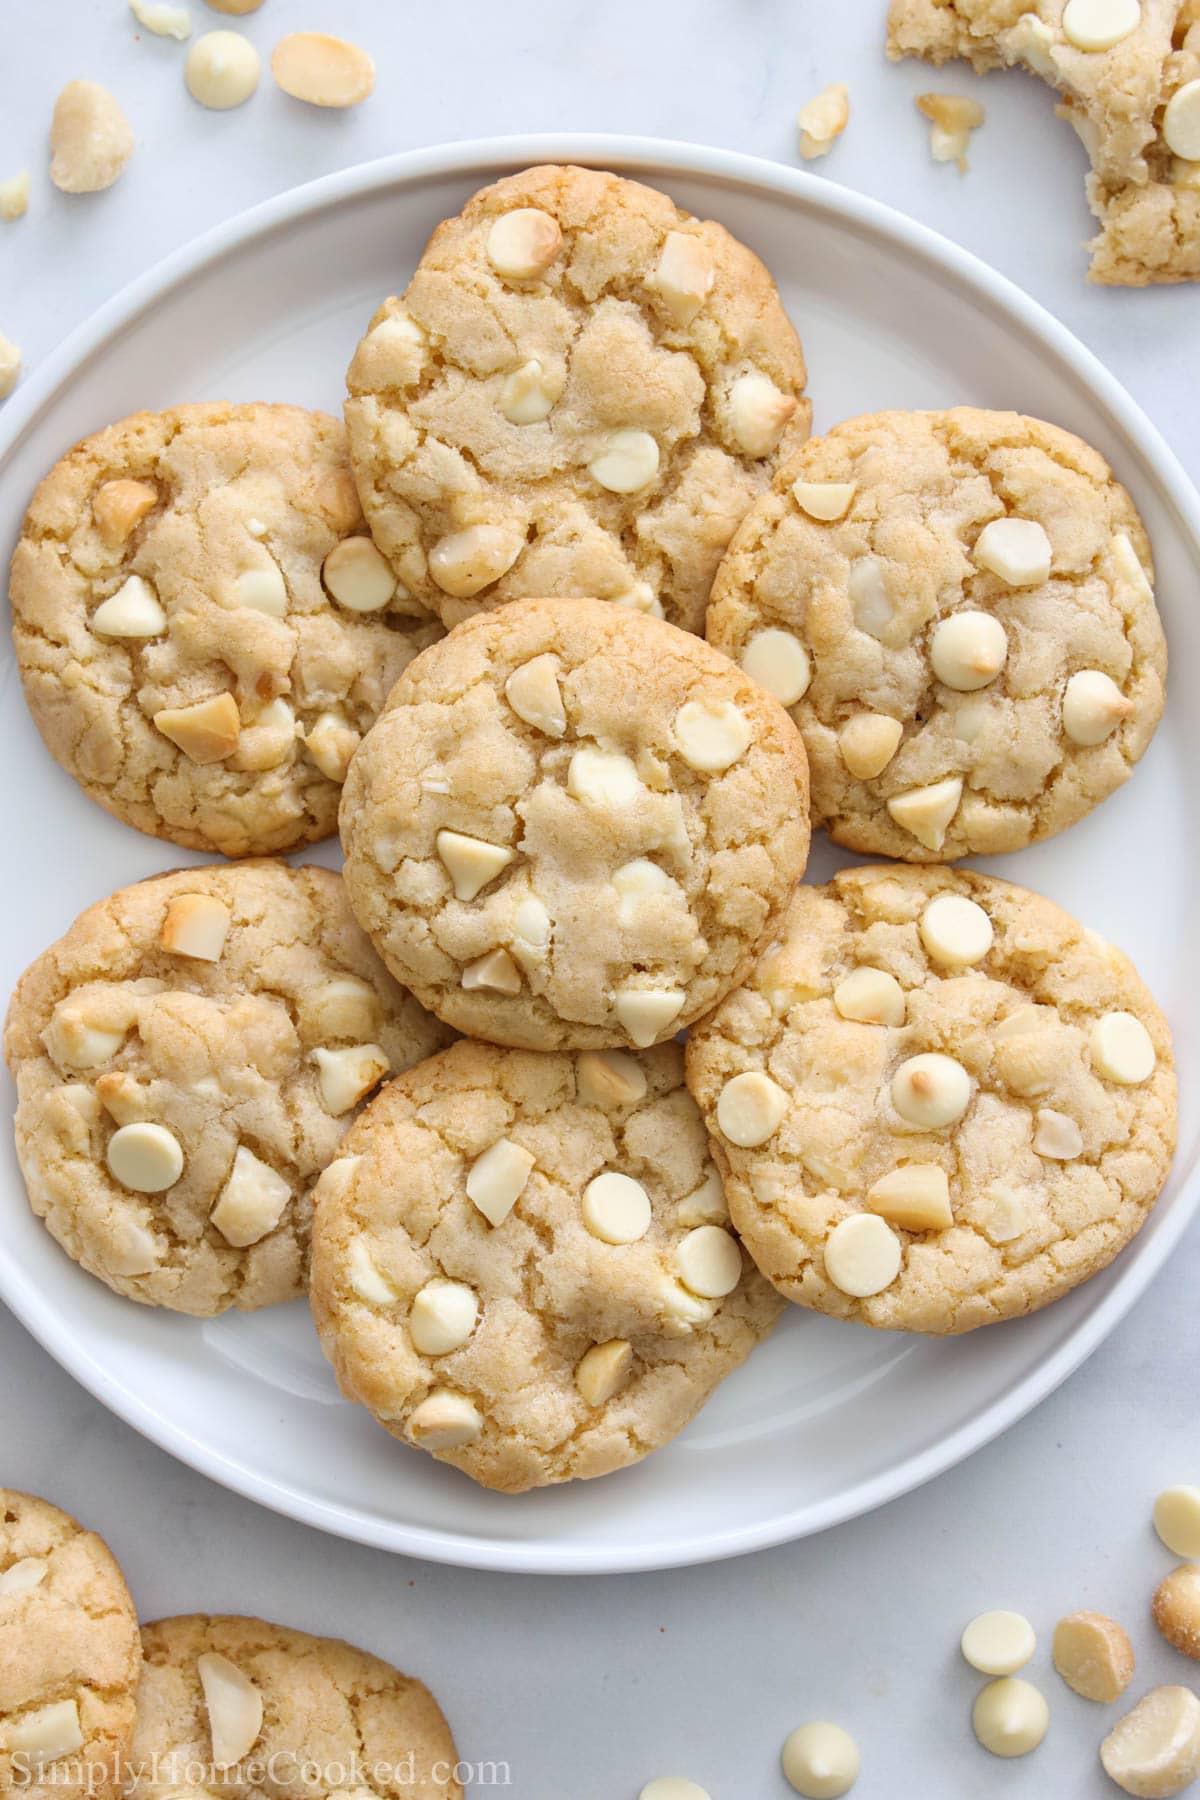 Vertical image of a plate of White Chocolate Macadamia Nut Cookies with nuts and chocolate chips nearby